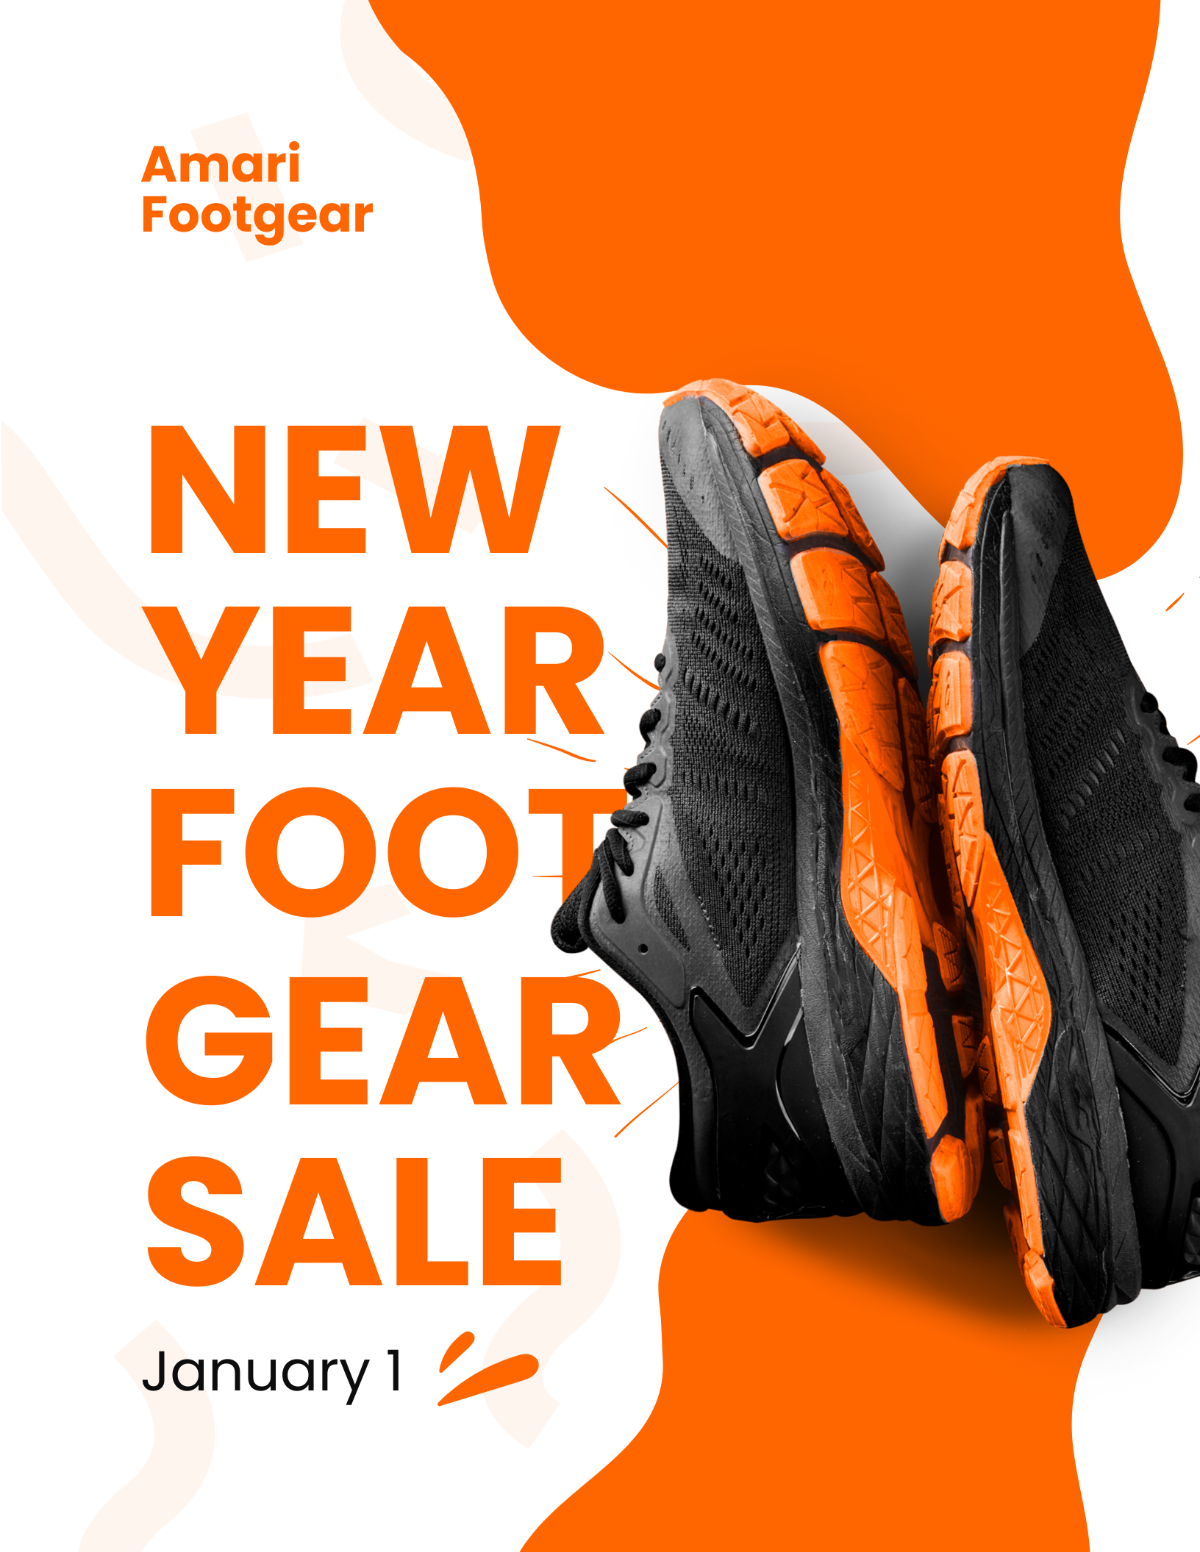 New Year Product Sale Promotion Flyer